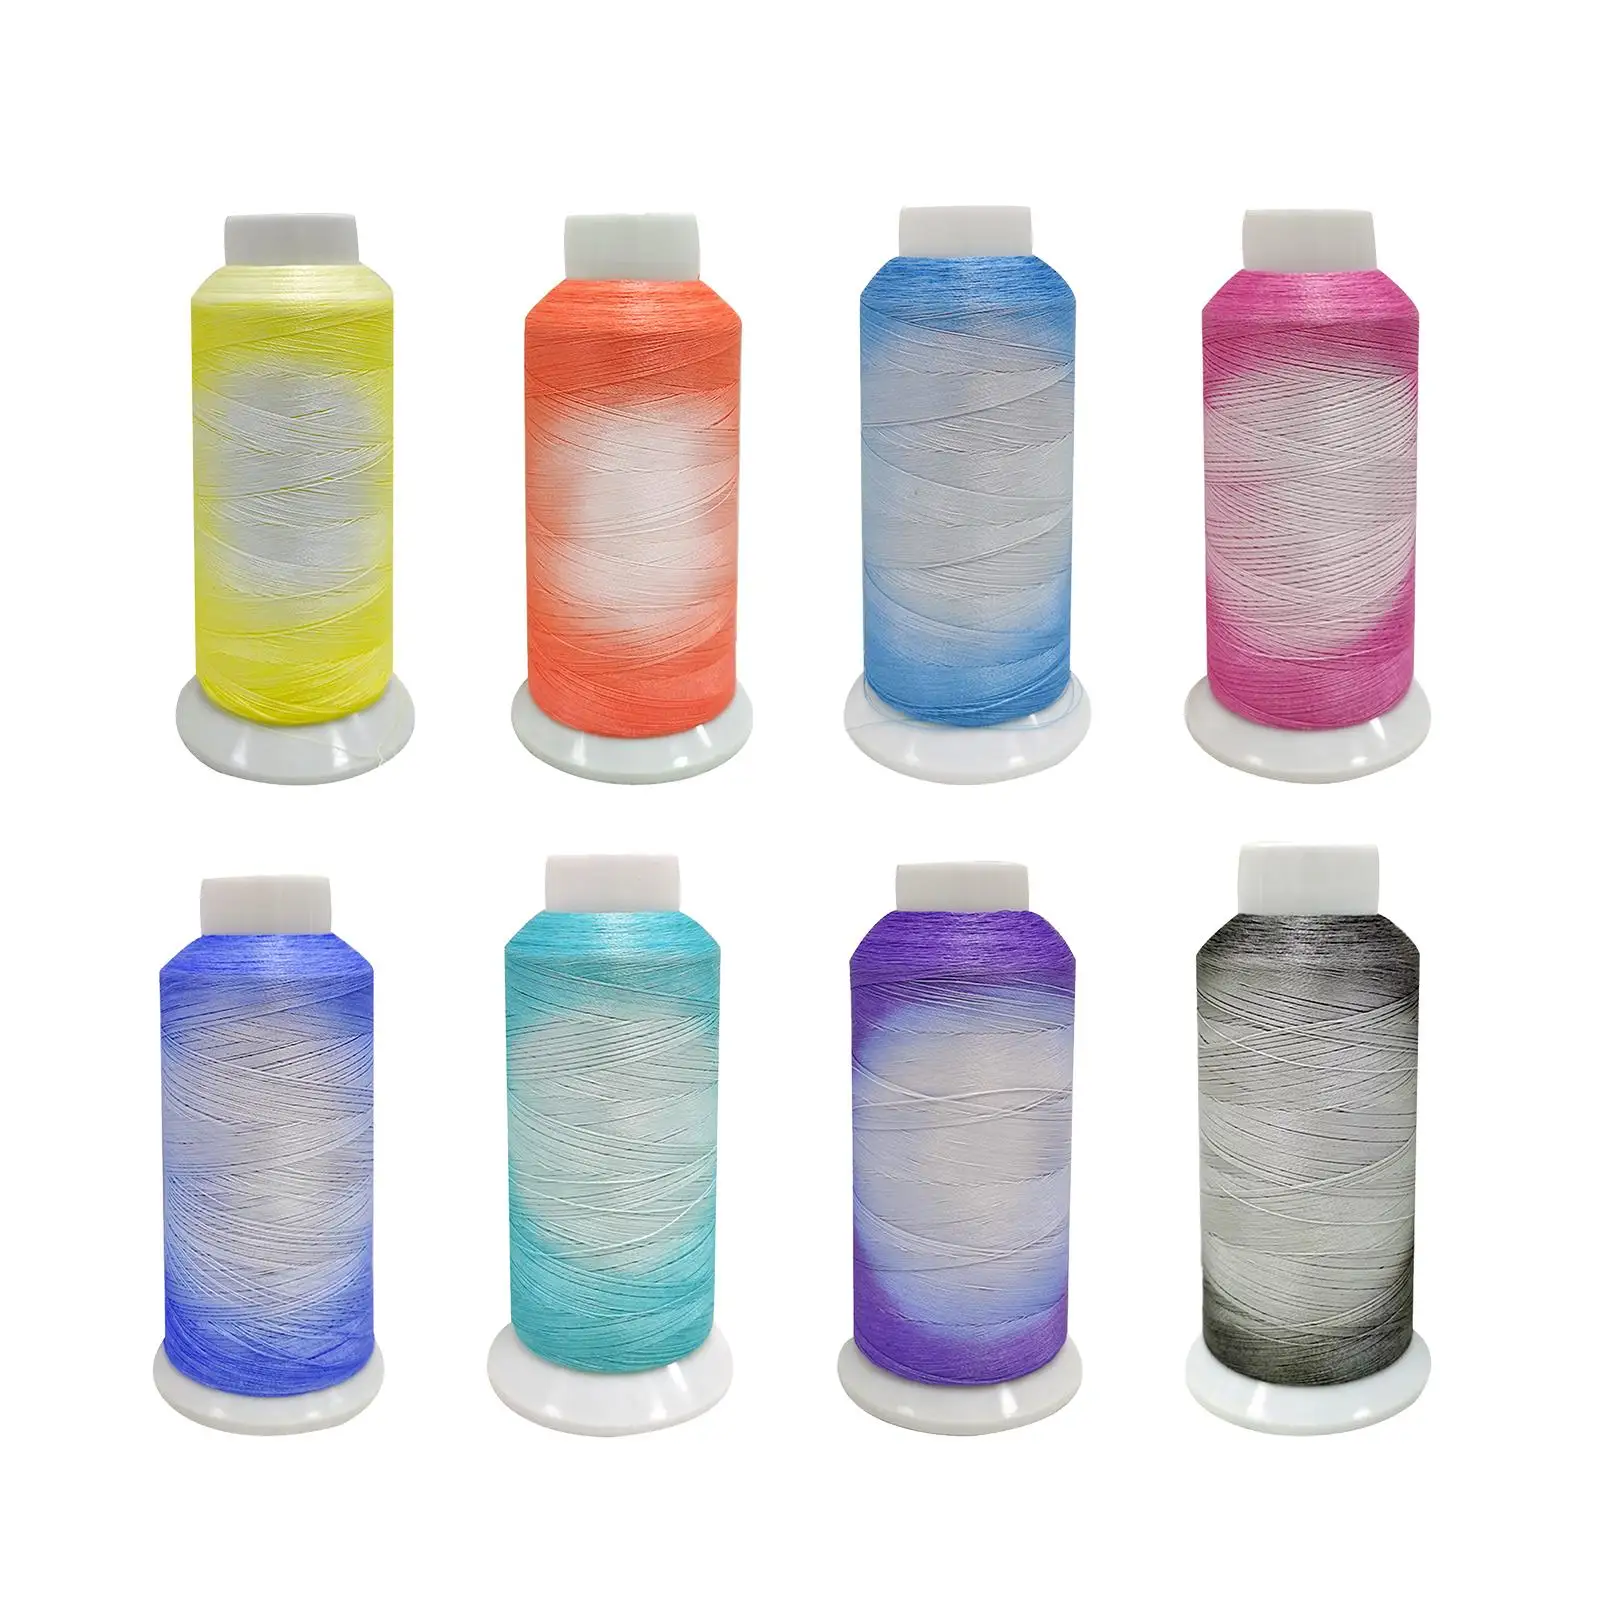 Colorful Color Changing Thread Embroidery Sewing Thread Spool Polyester Supplies for Blanket Parties Sweater Scarf Raves